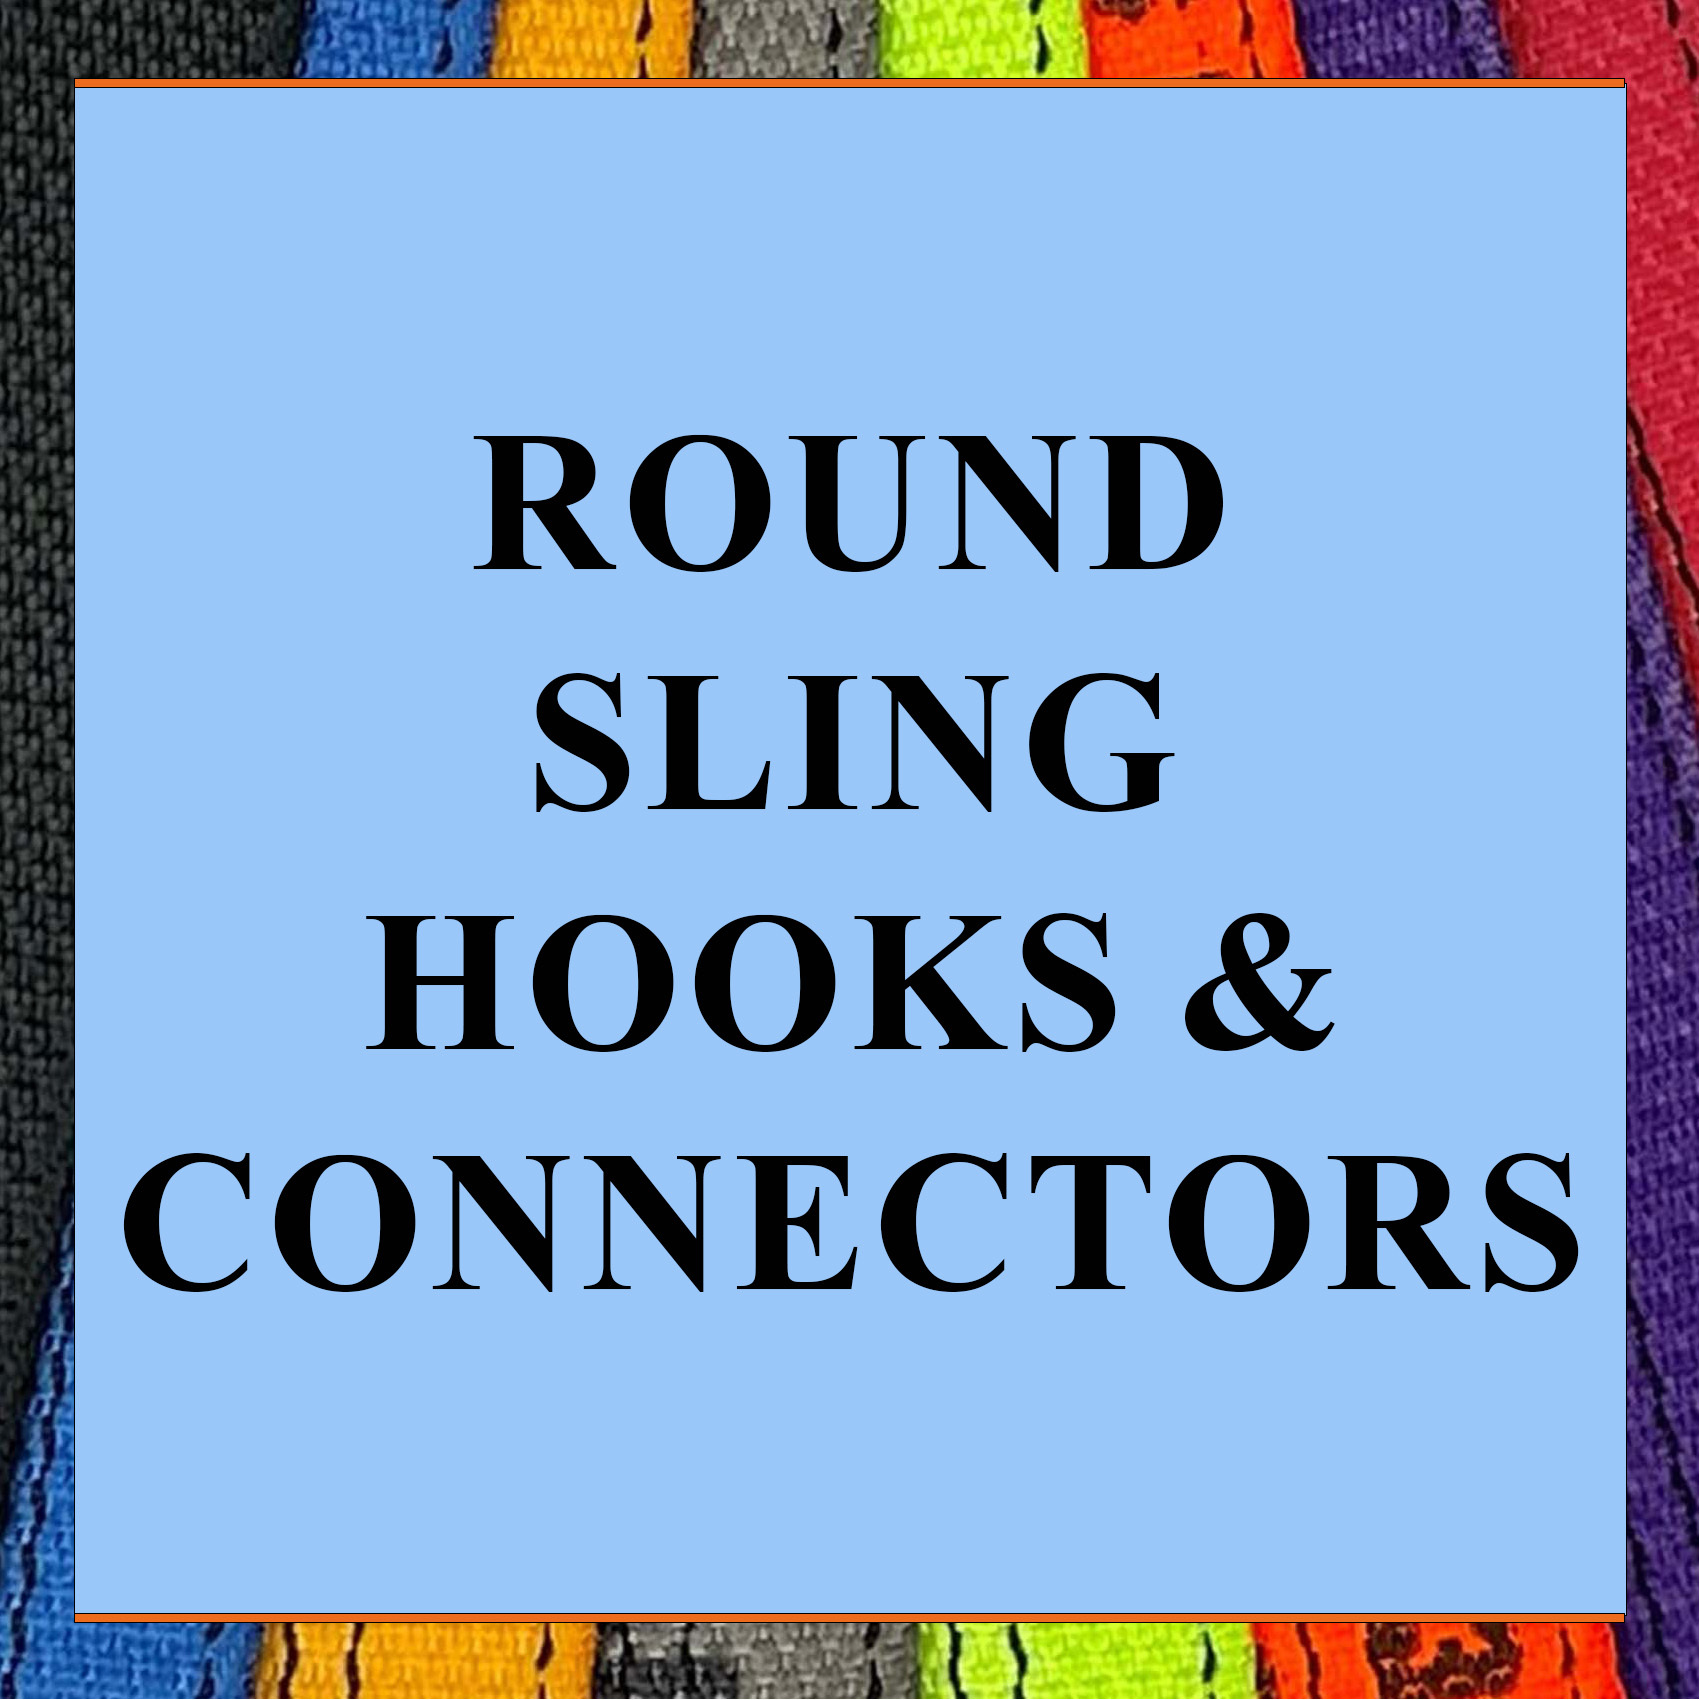 Round Sling Hooks & Connectors